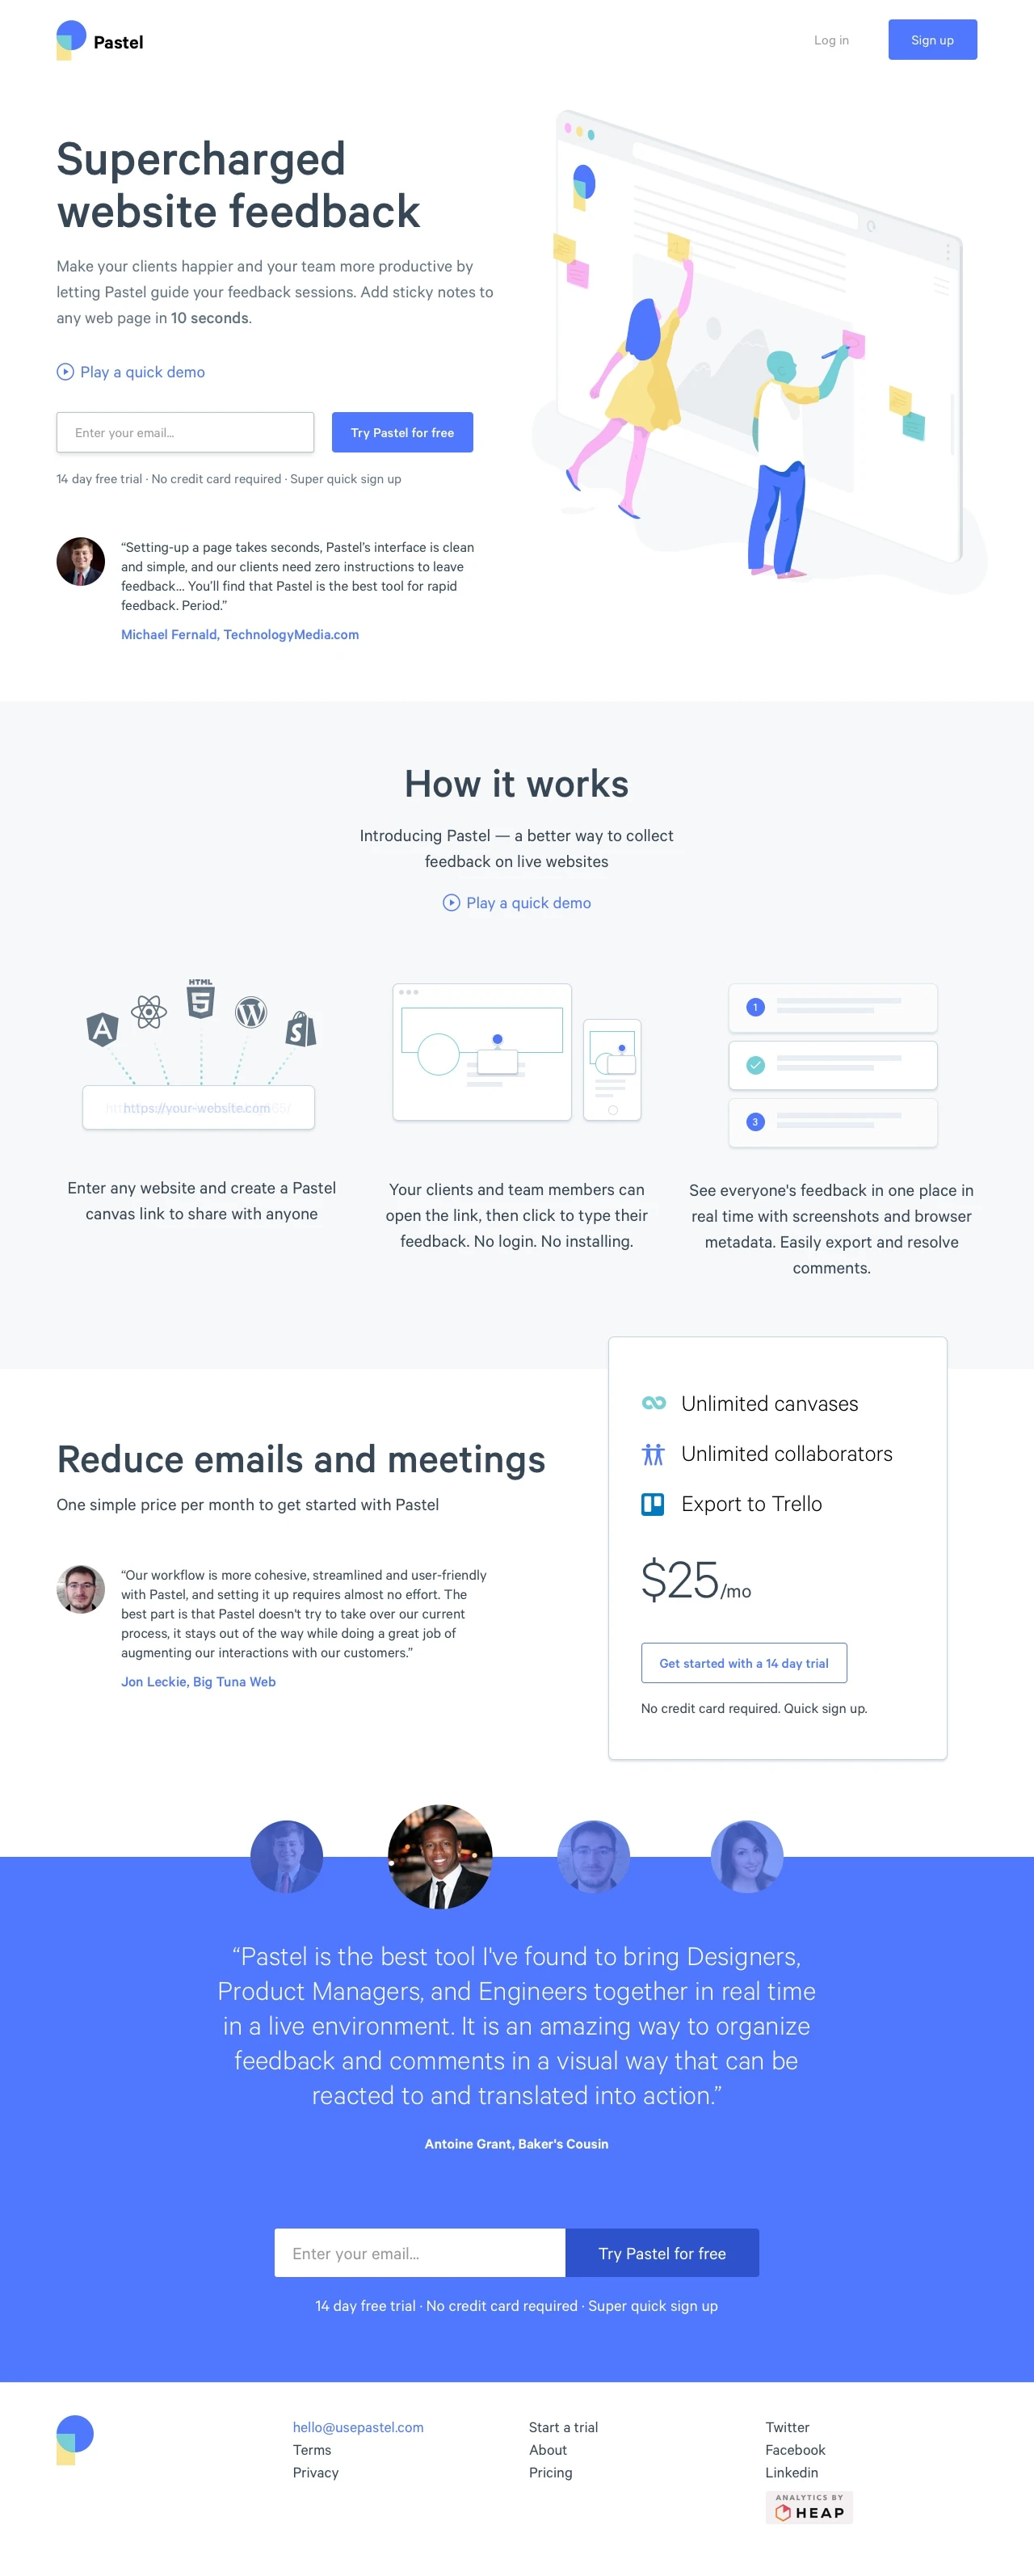 Pastel Landing Page Example: Make your clients happier and your team more productive by letting Pastel guide your feedback sessions. Add sticky notes to any web page in 10 seconds.